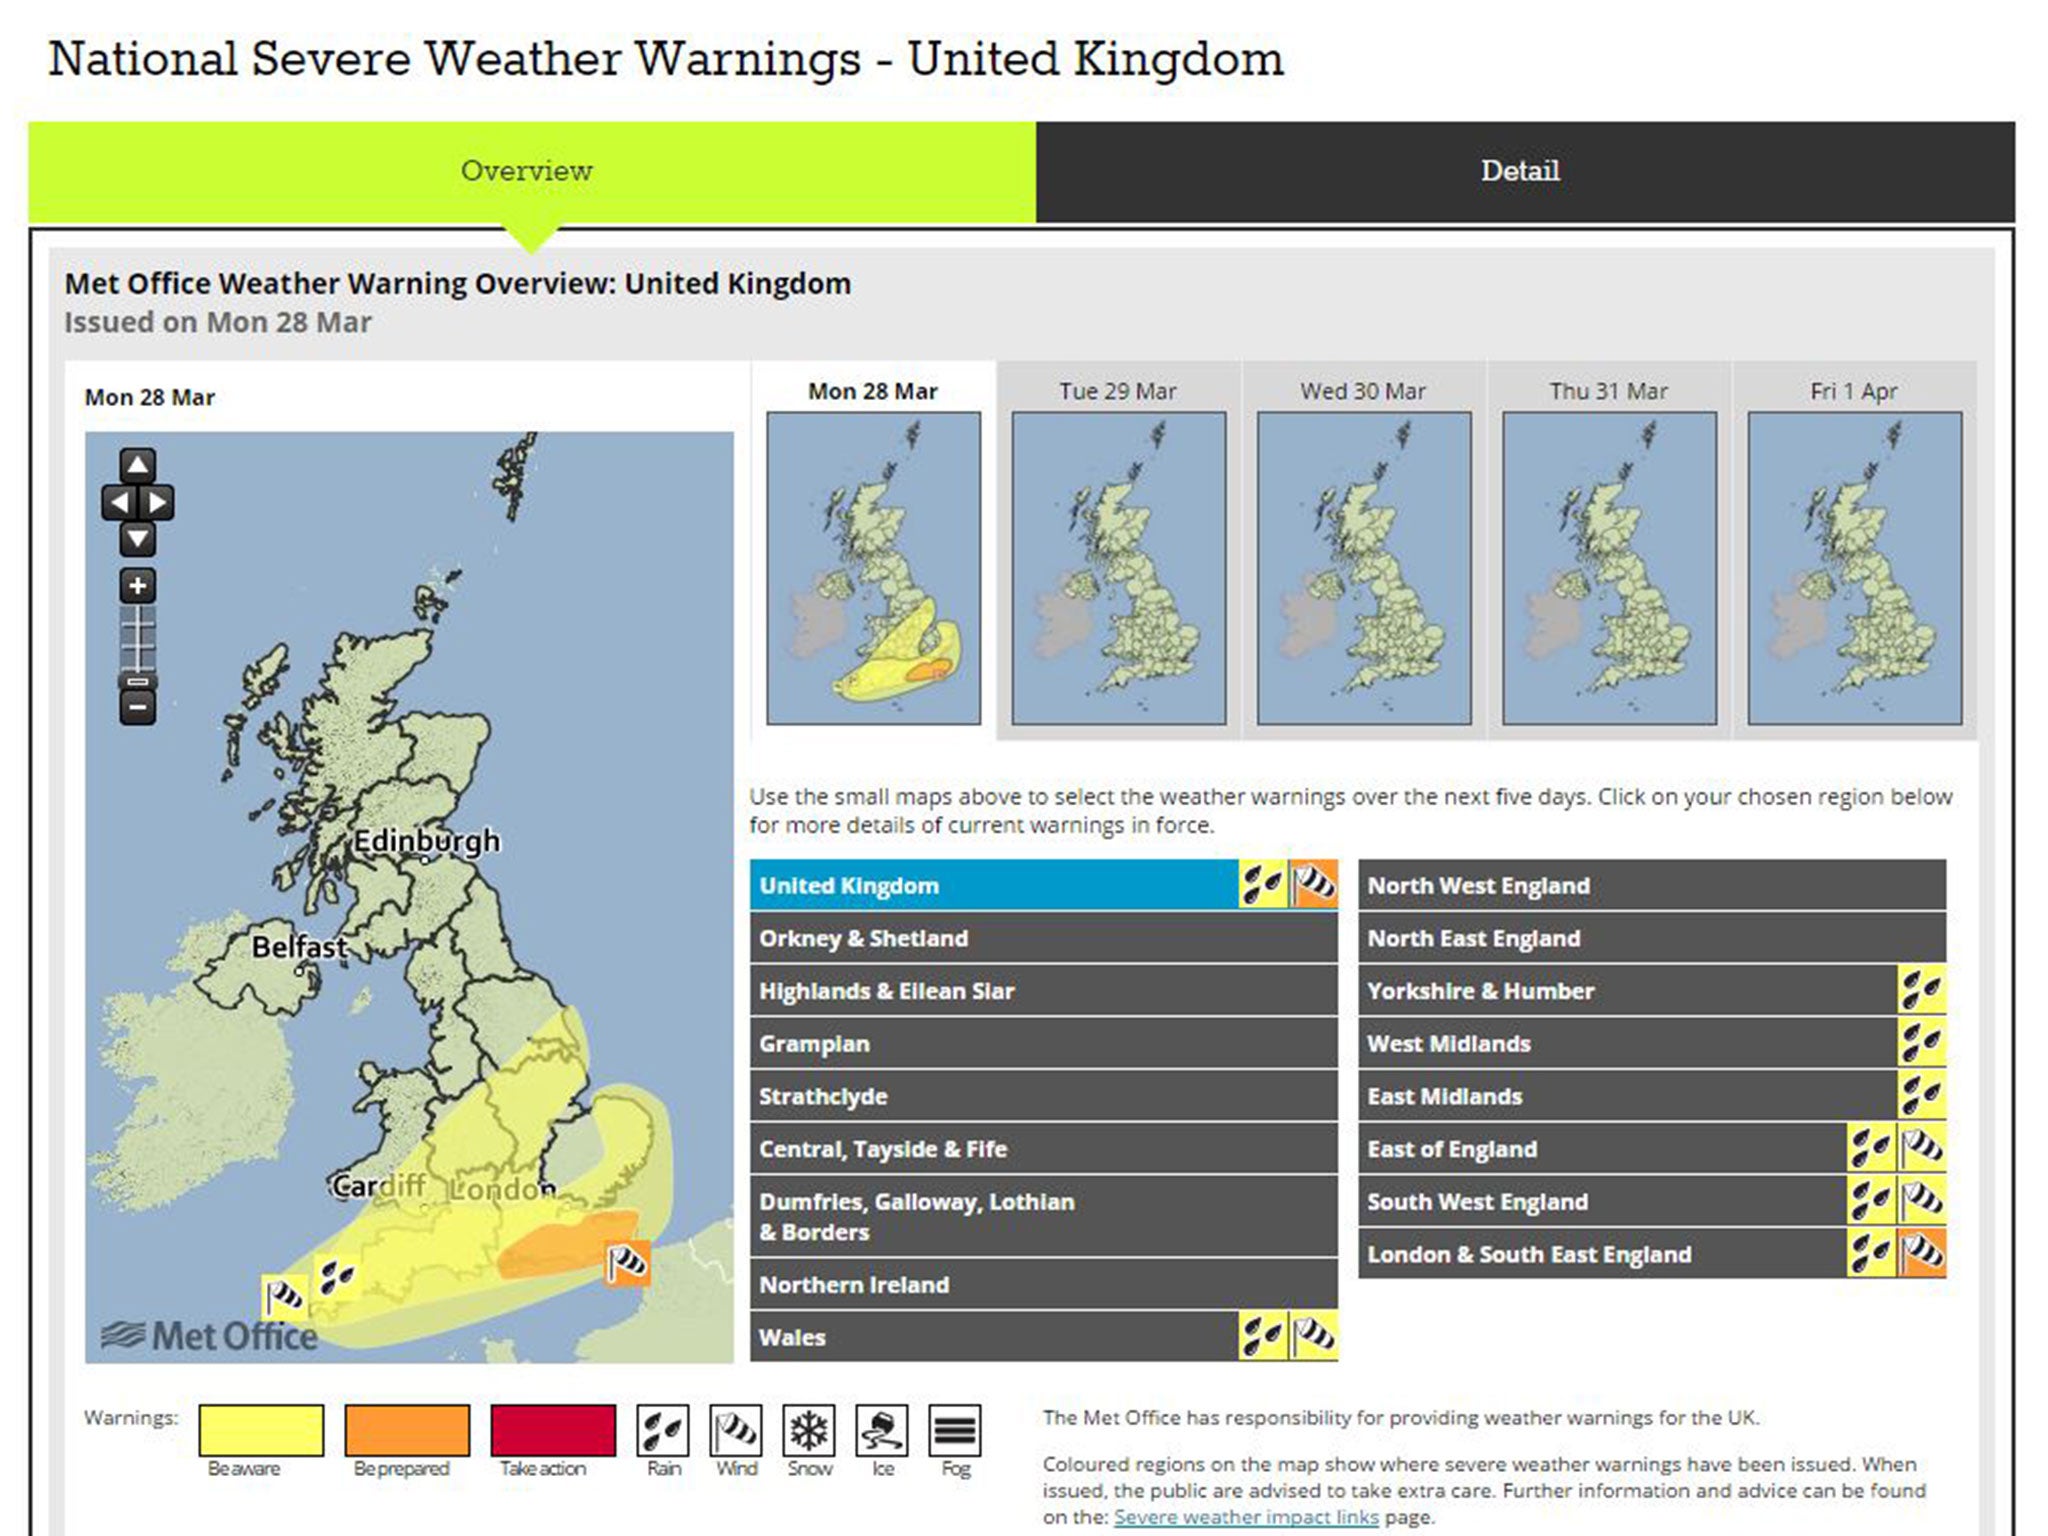 Details of weather warnings for Monday 28 March, 2016